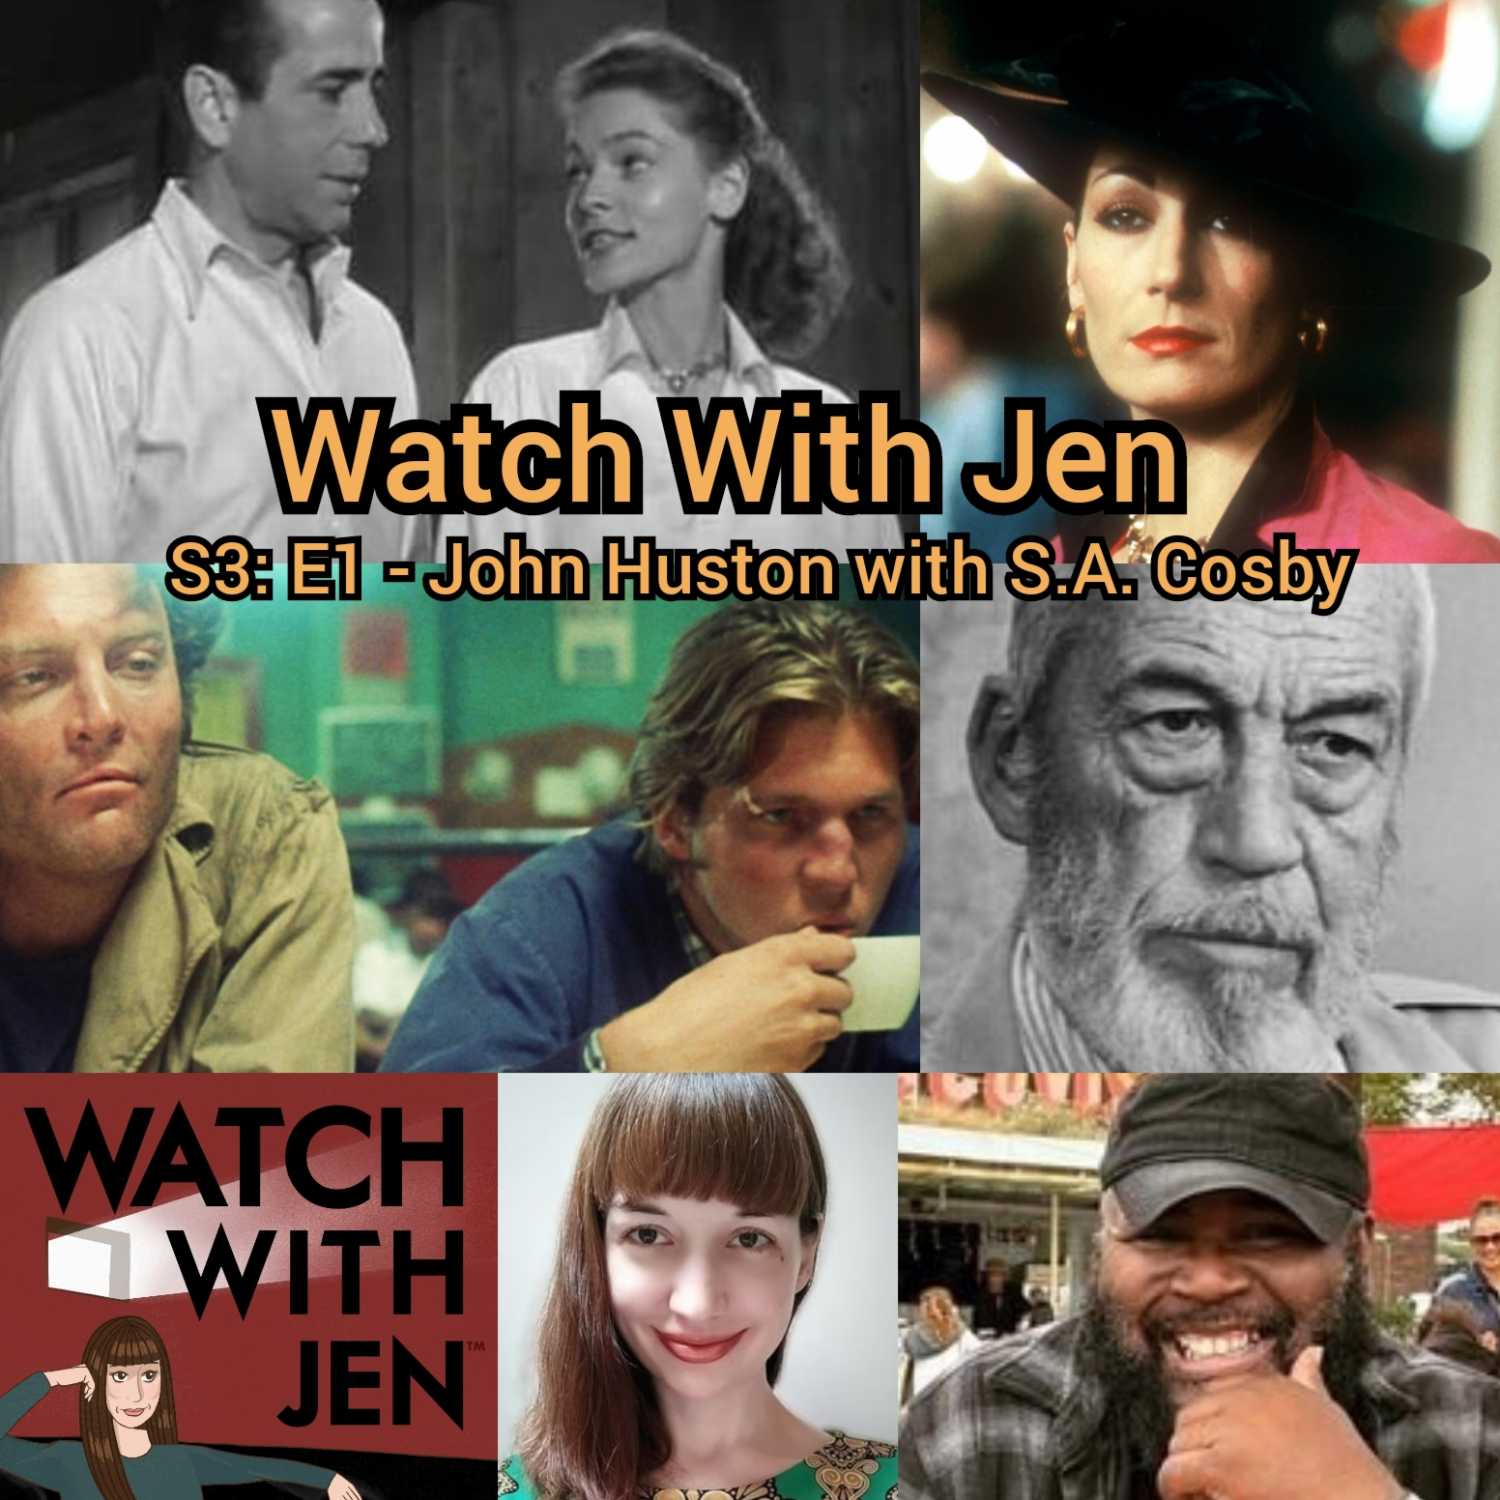 Watch With Jen - S3: E1 - John Huston with S.A. Cosby